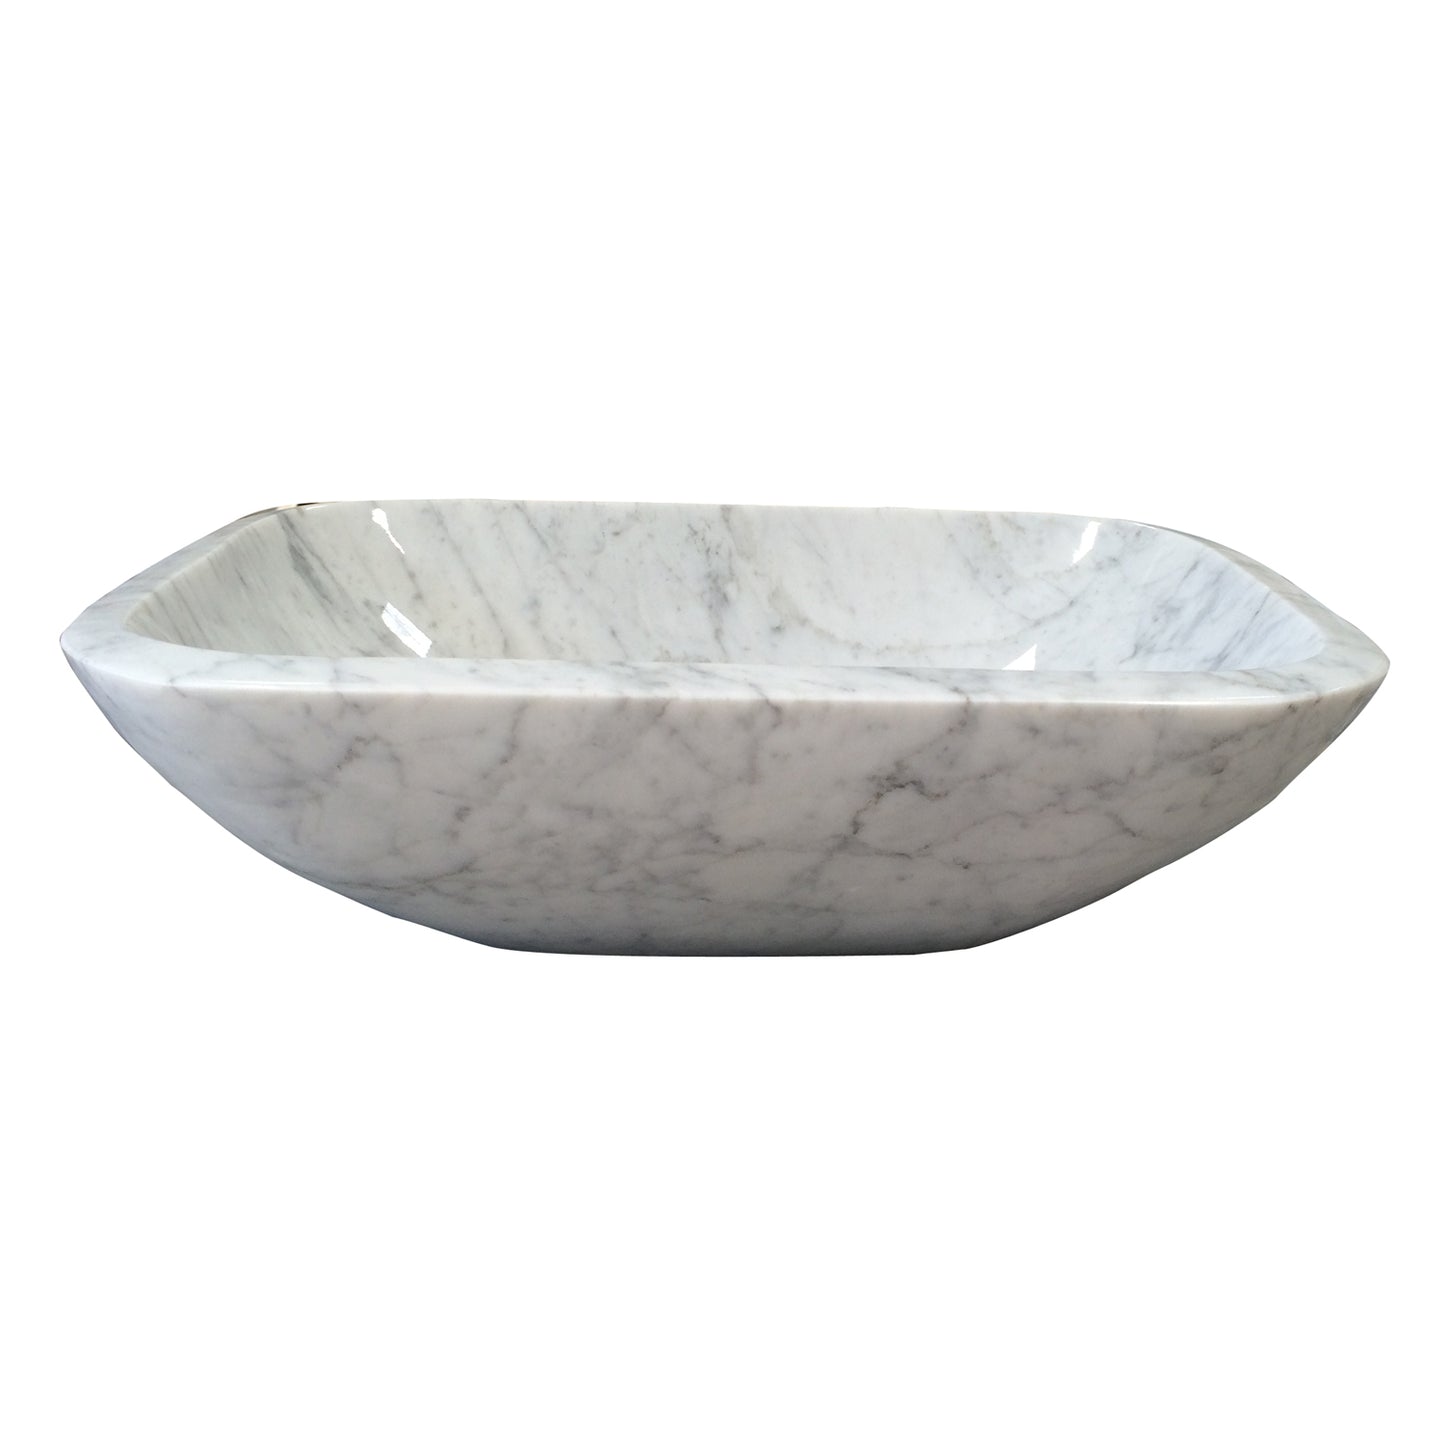 Gessi Carrara Marble Vessel Sink 16-1/2" x 12" Rectangle with Polished Finish